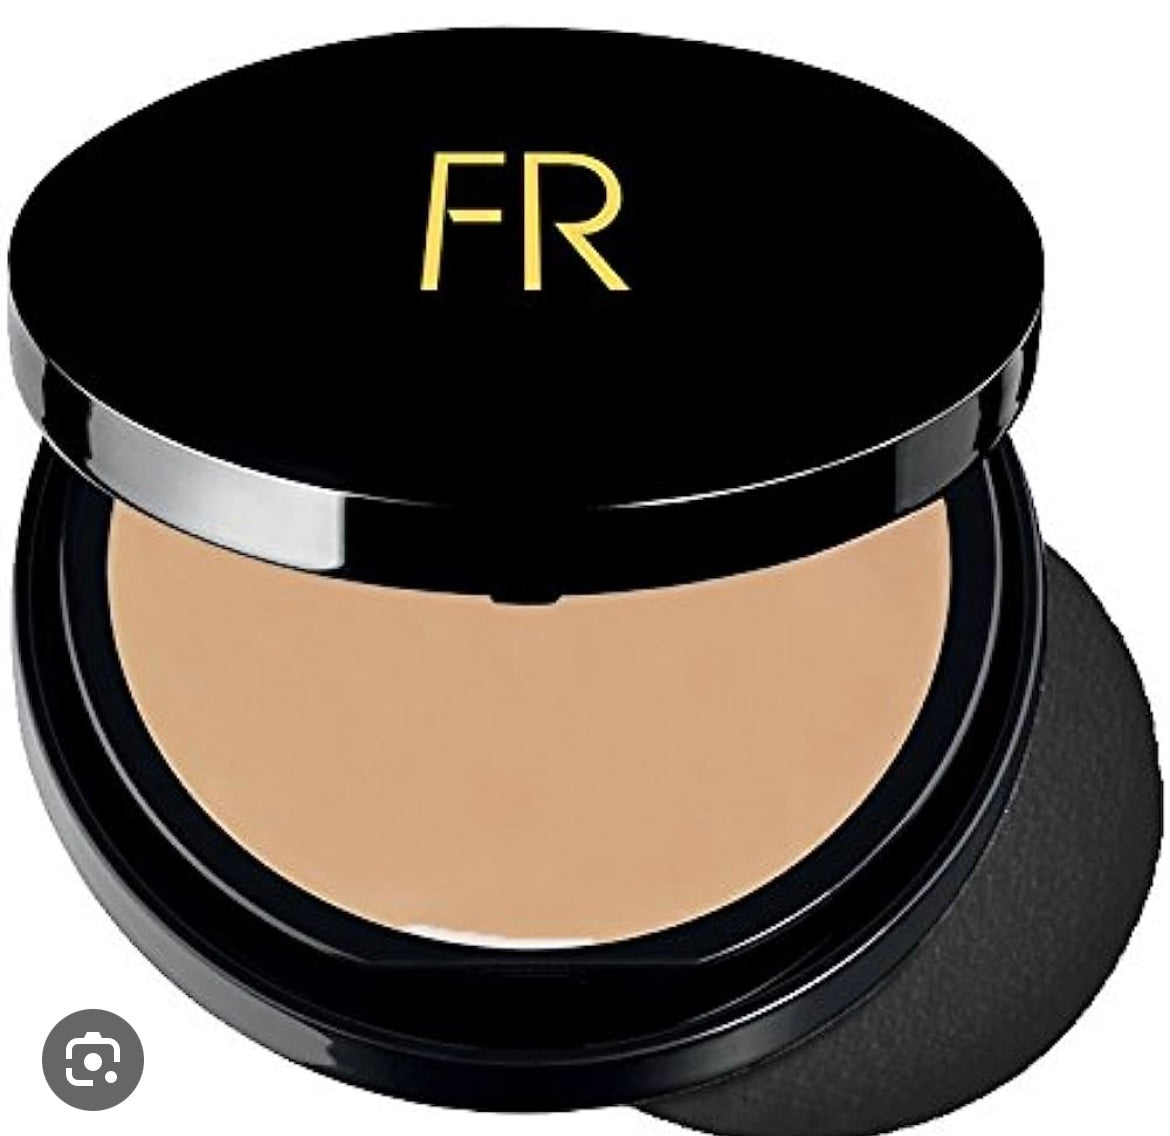 Best Creme to Powder Foundation For Women of Color or Deeper Skin Tones - Shade - SAND